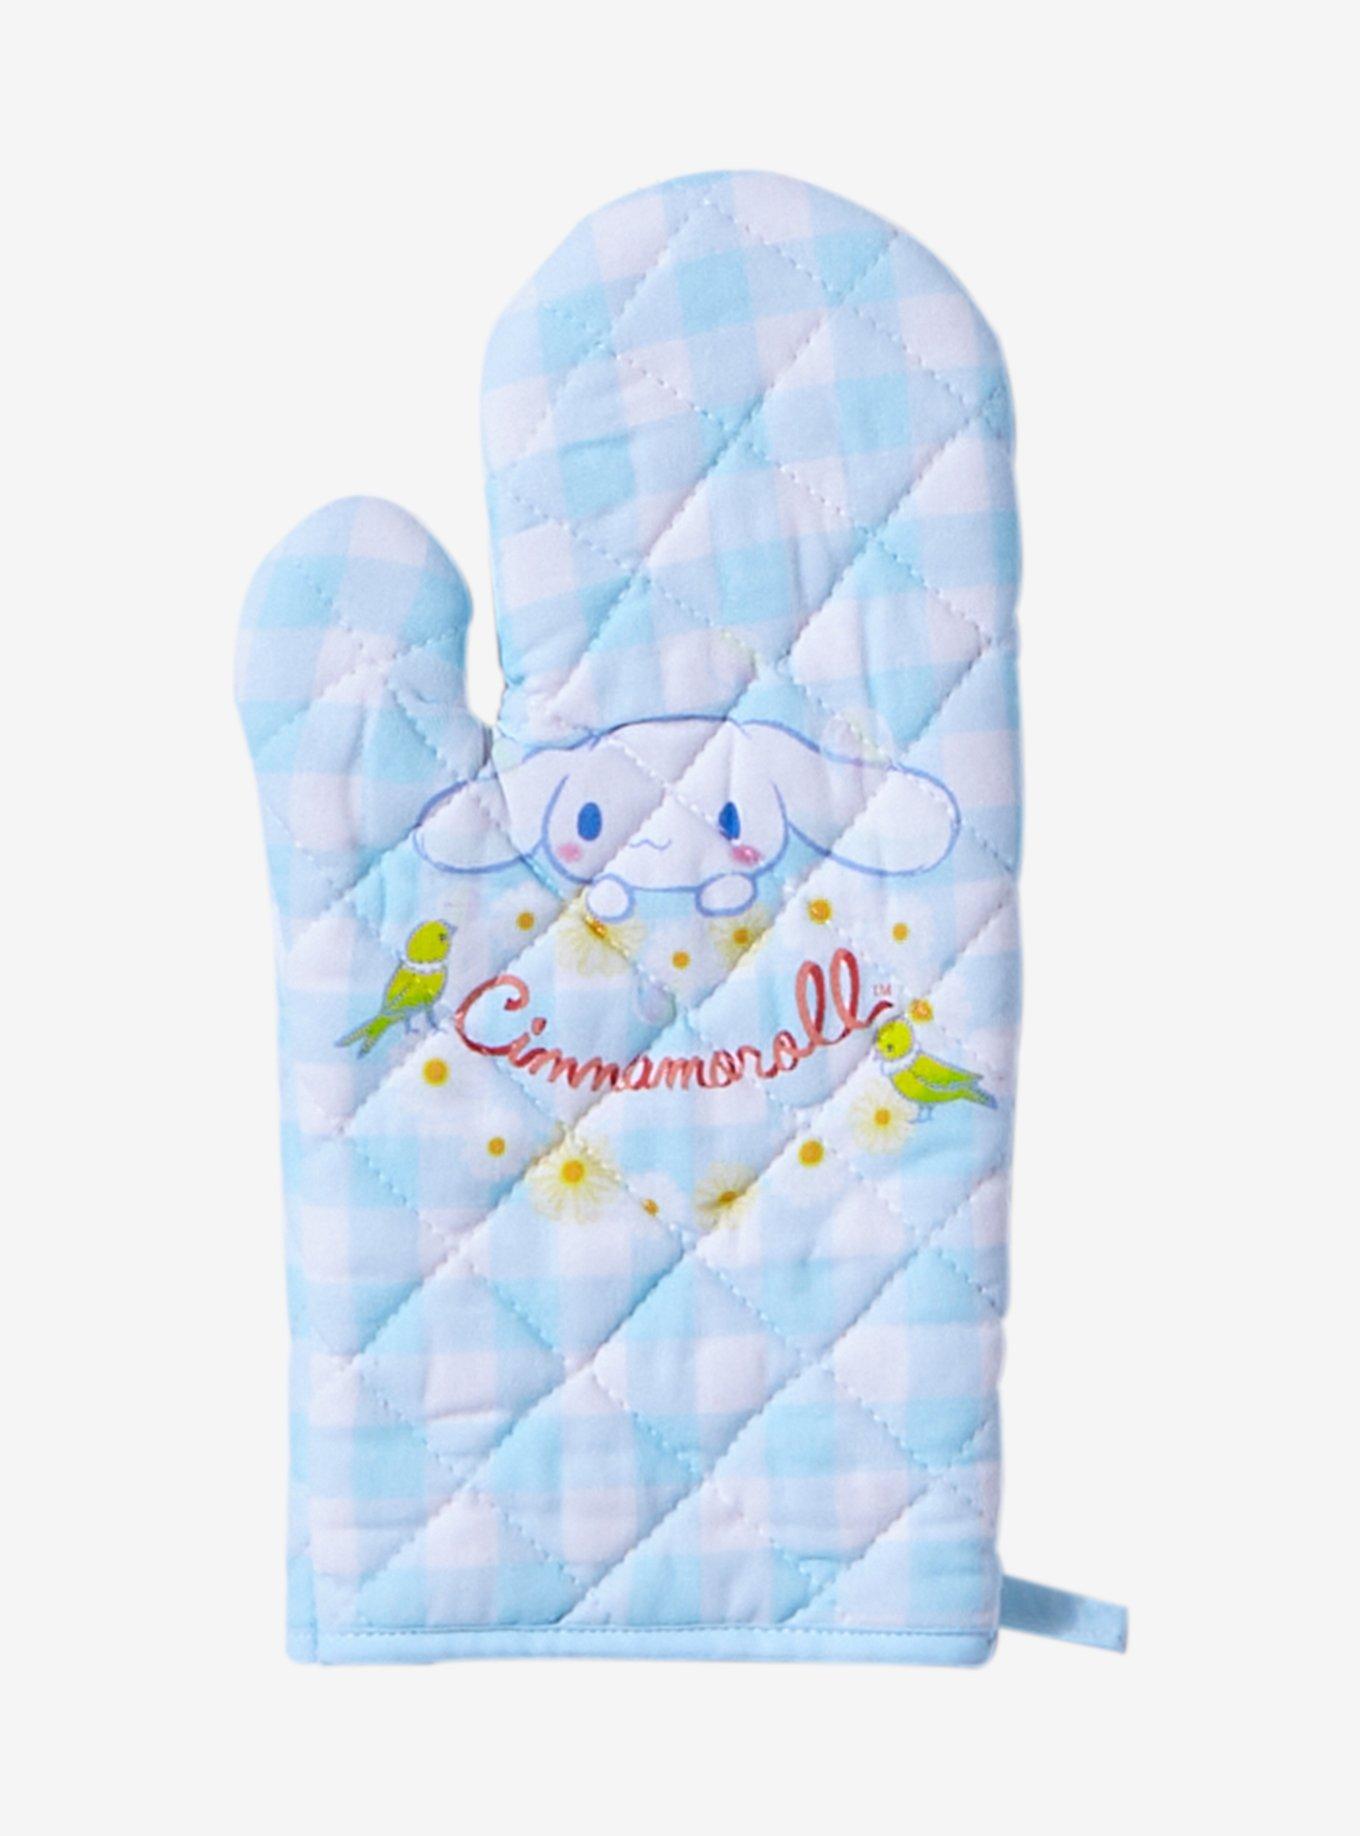 Cute Cinnamoroll Oven Mitts 1 Pair Cooking Gloves for Cooking Baking  Grilling